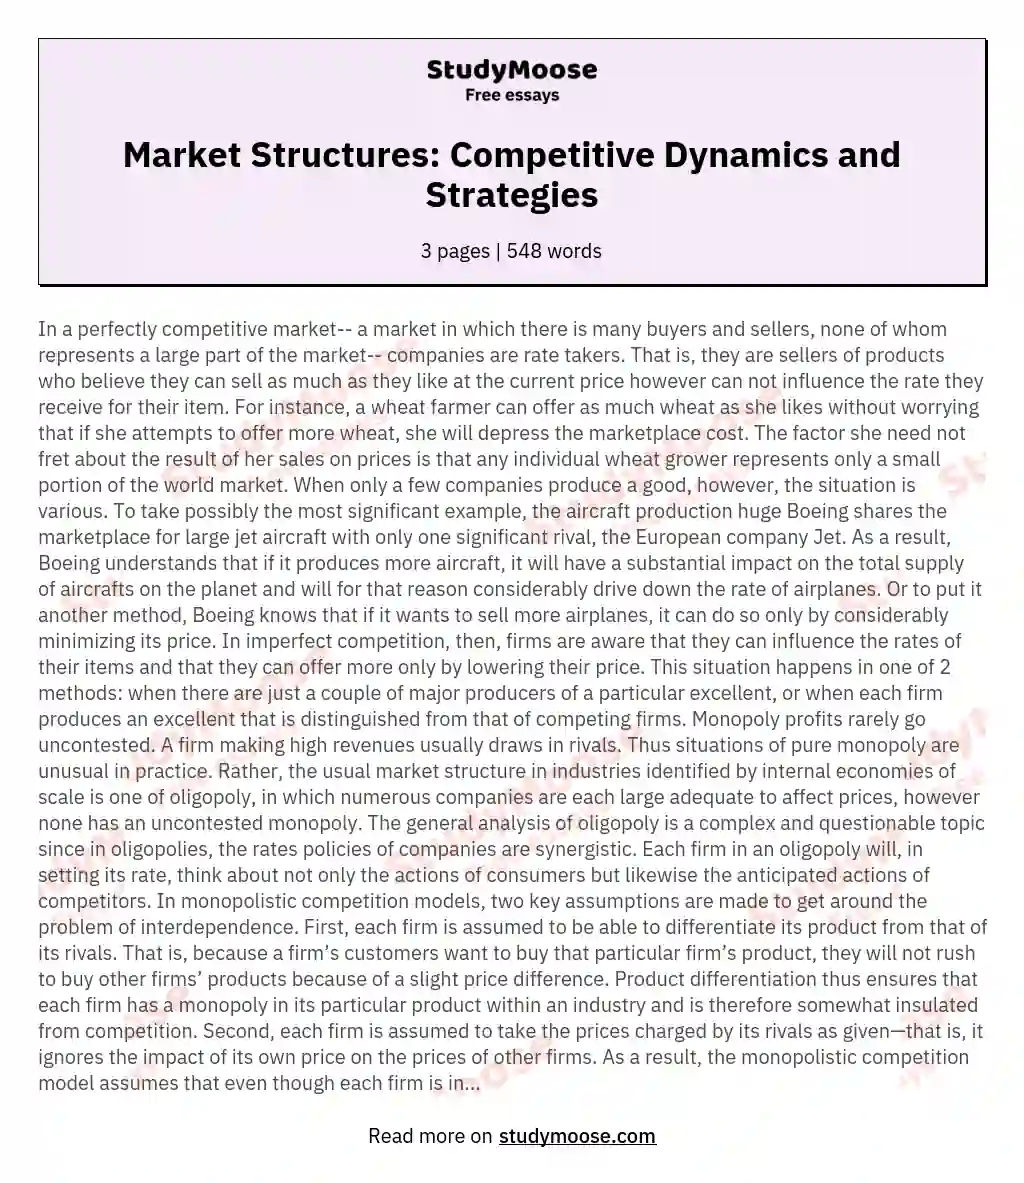 Market Structures: Competitive Dynamics and Strategies essay